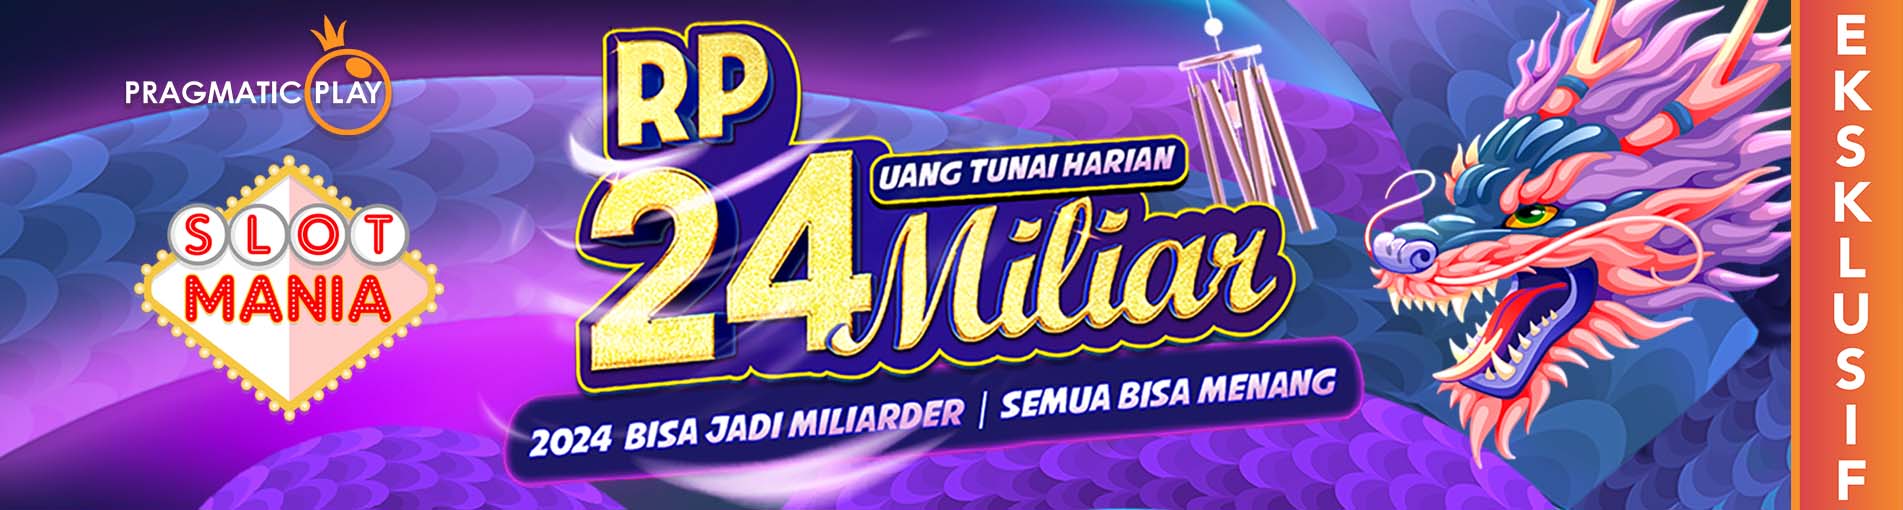 PP - SLOT MANIA DAILY TOURNAMENT AND DAILY CASH DROP